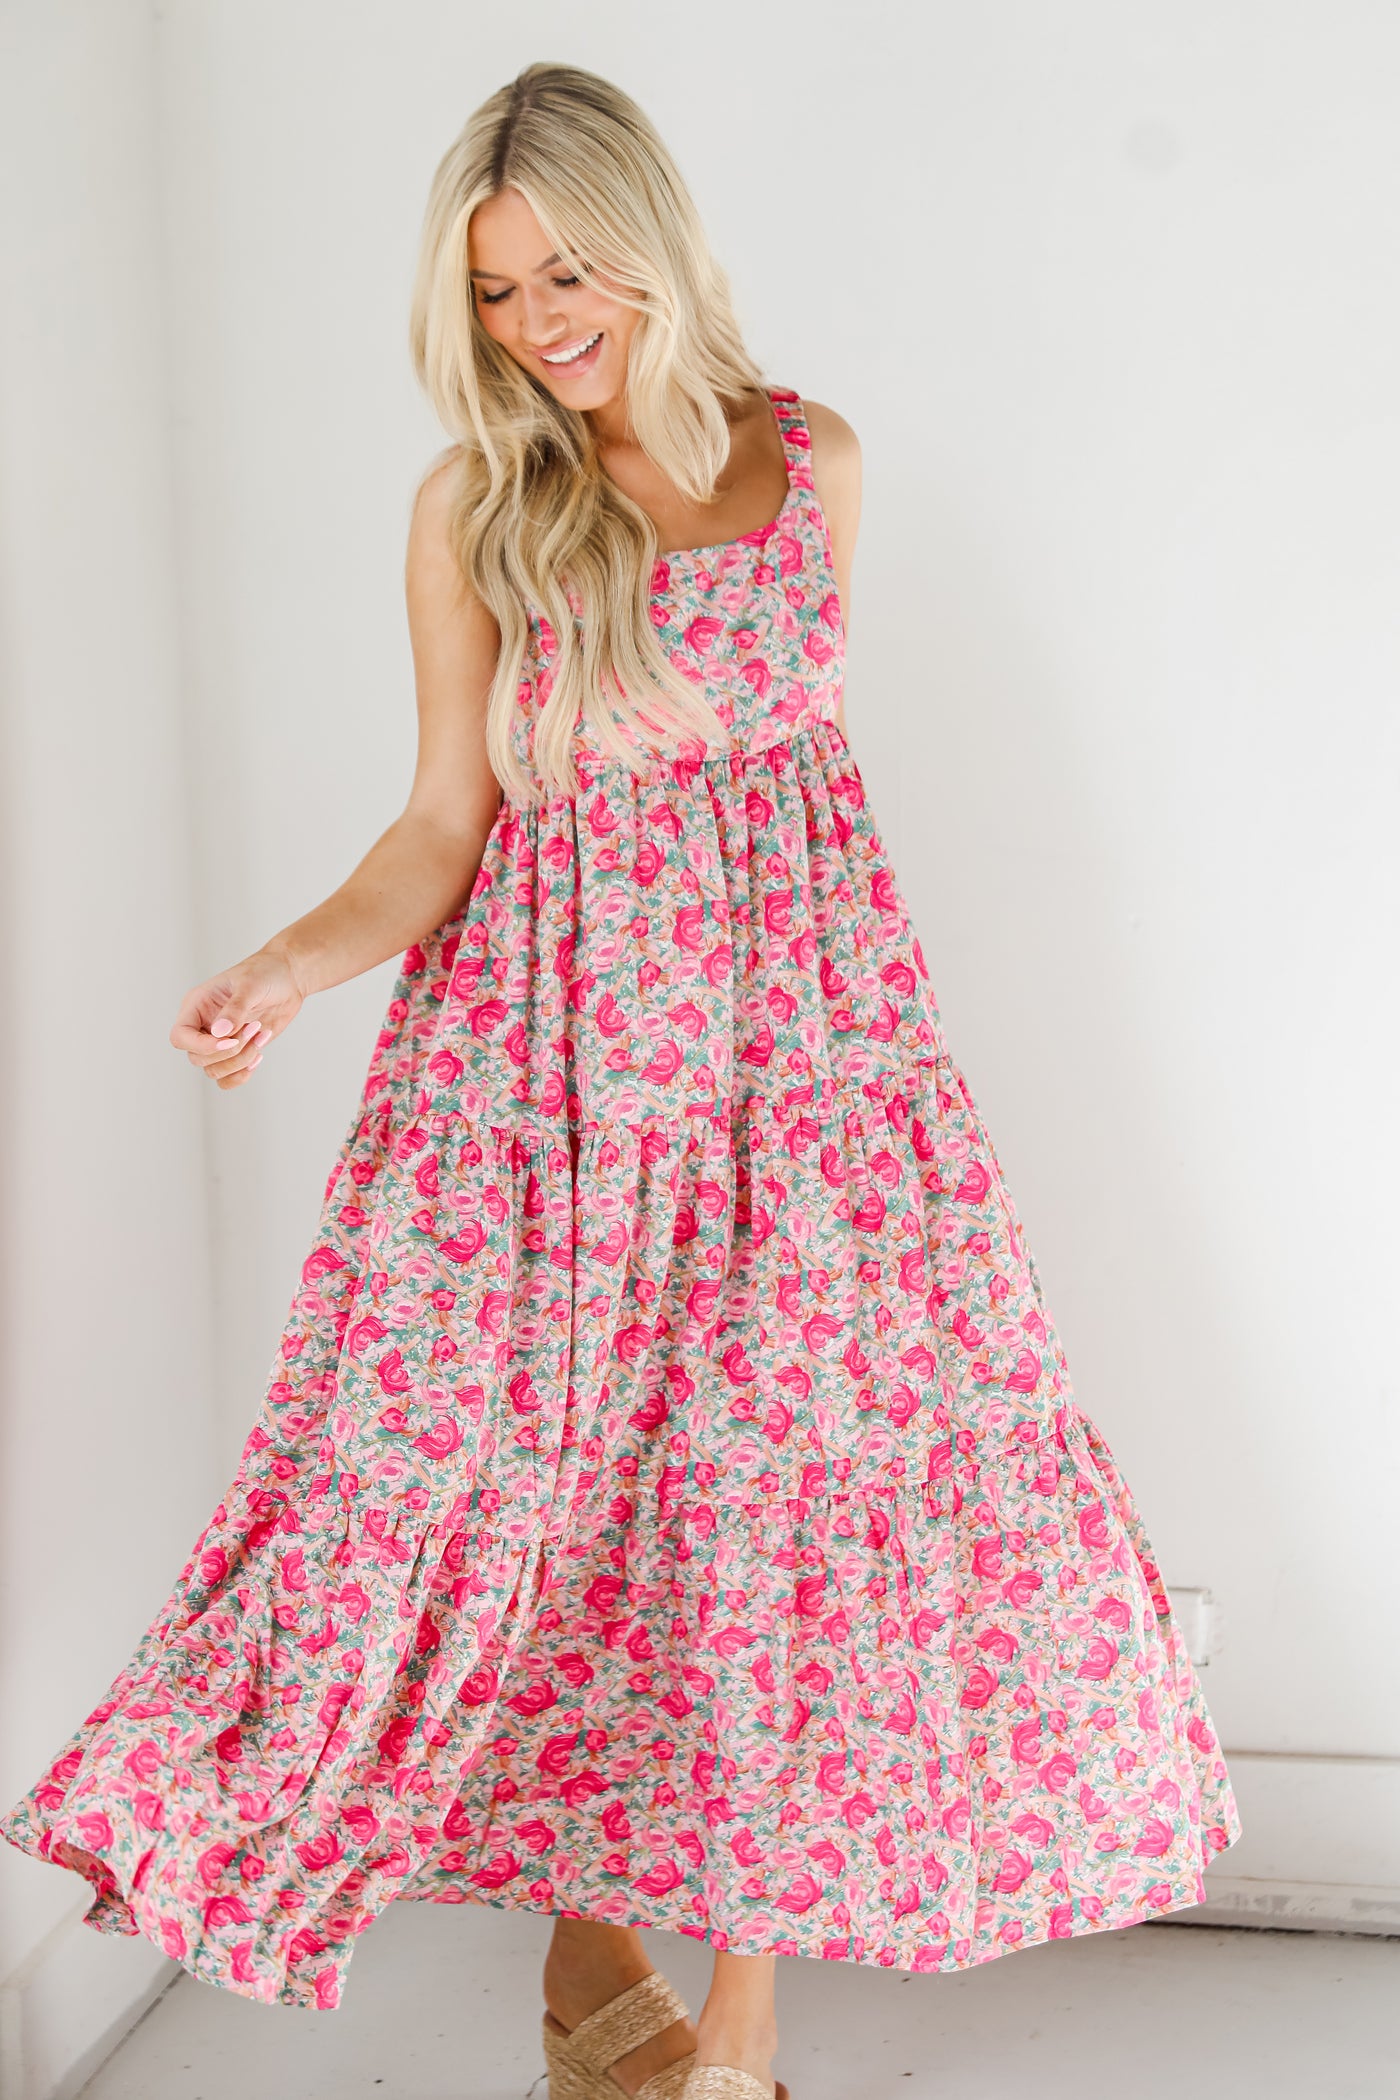 Dress pink floral tiered maxi DI5596FO - Forema Boutique